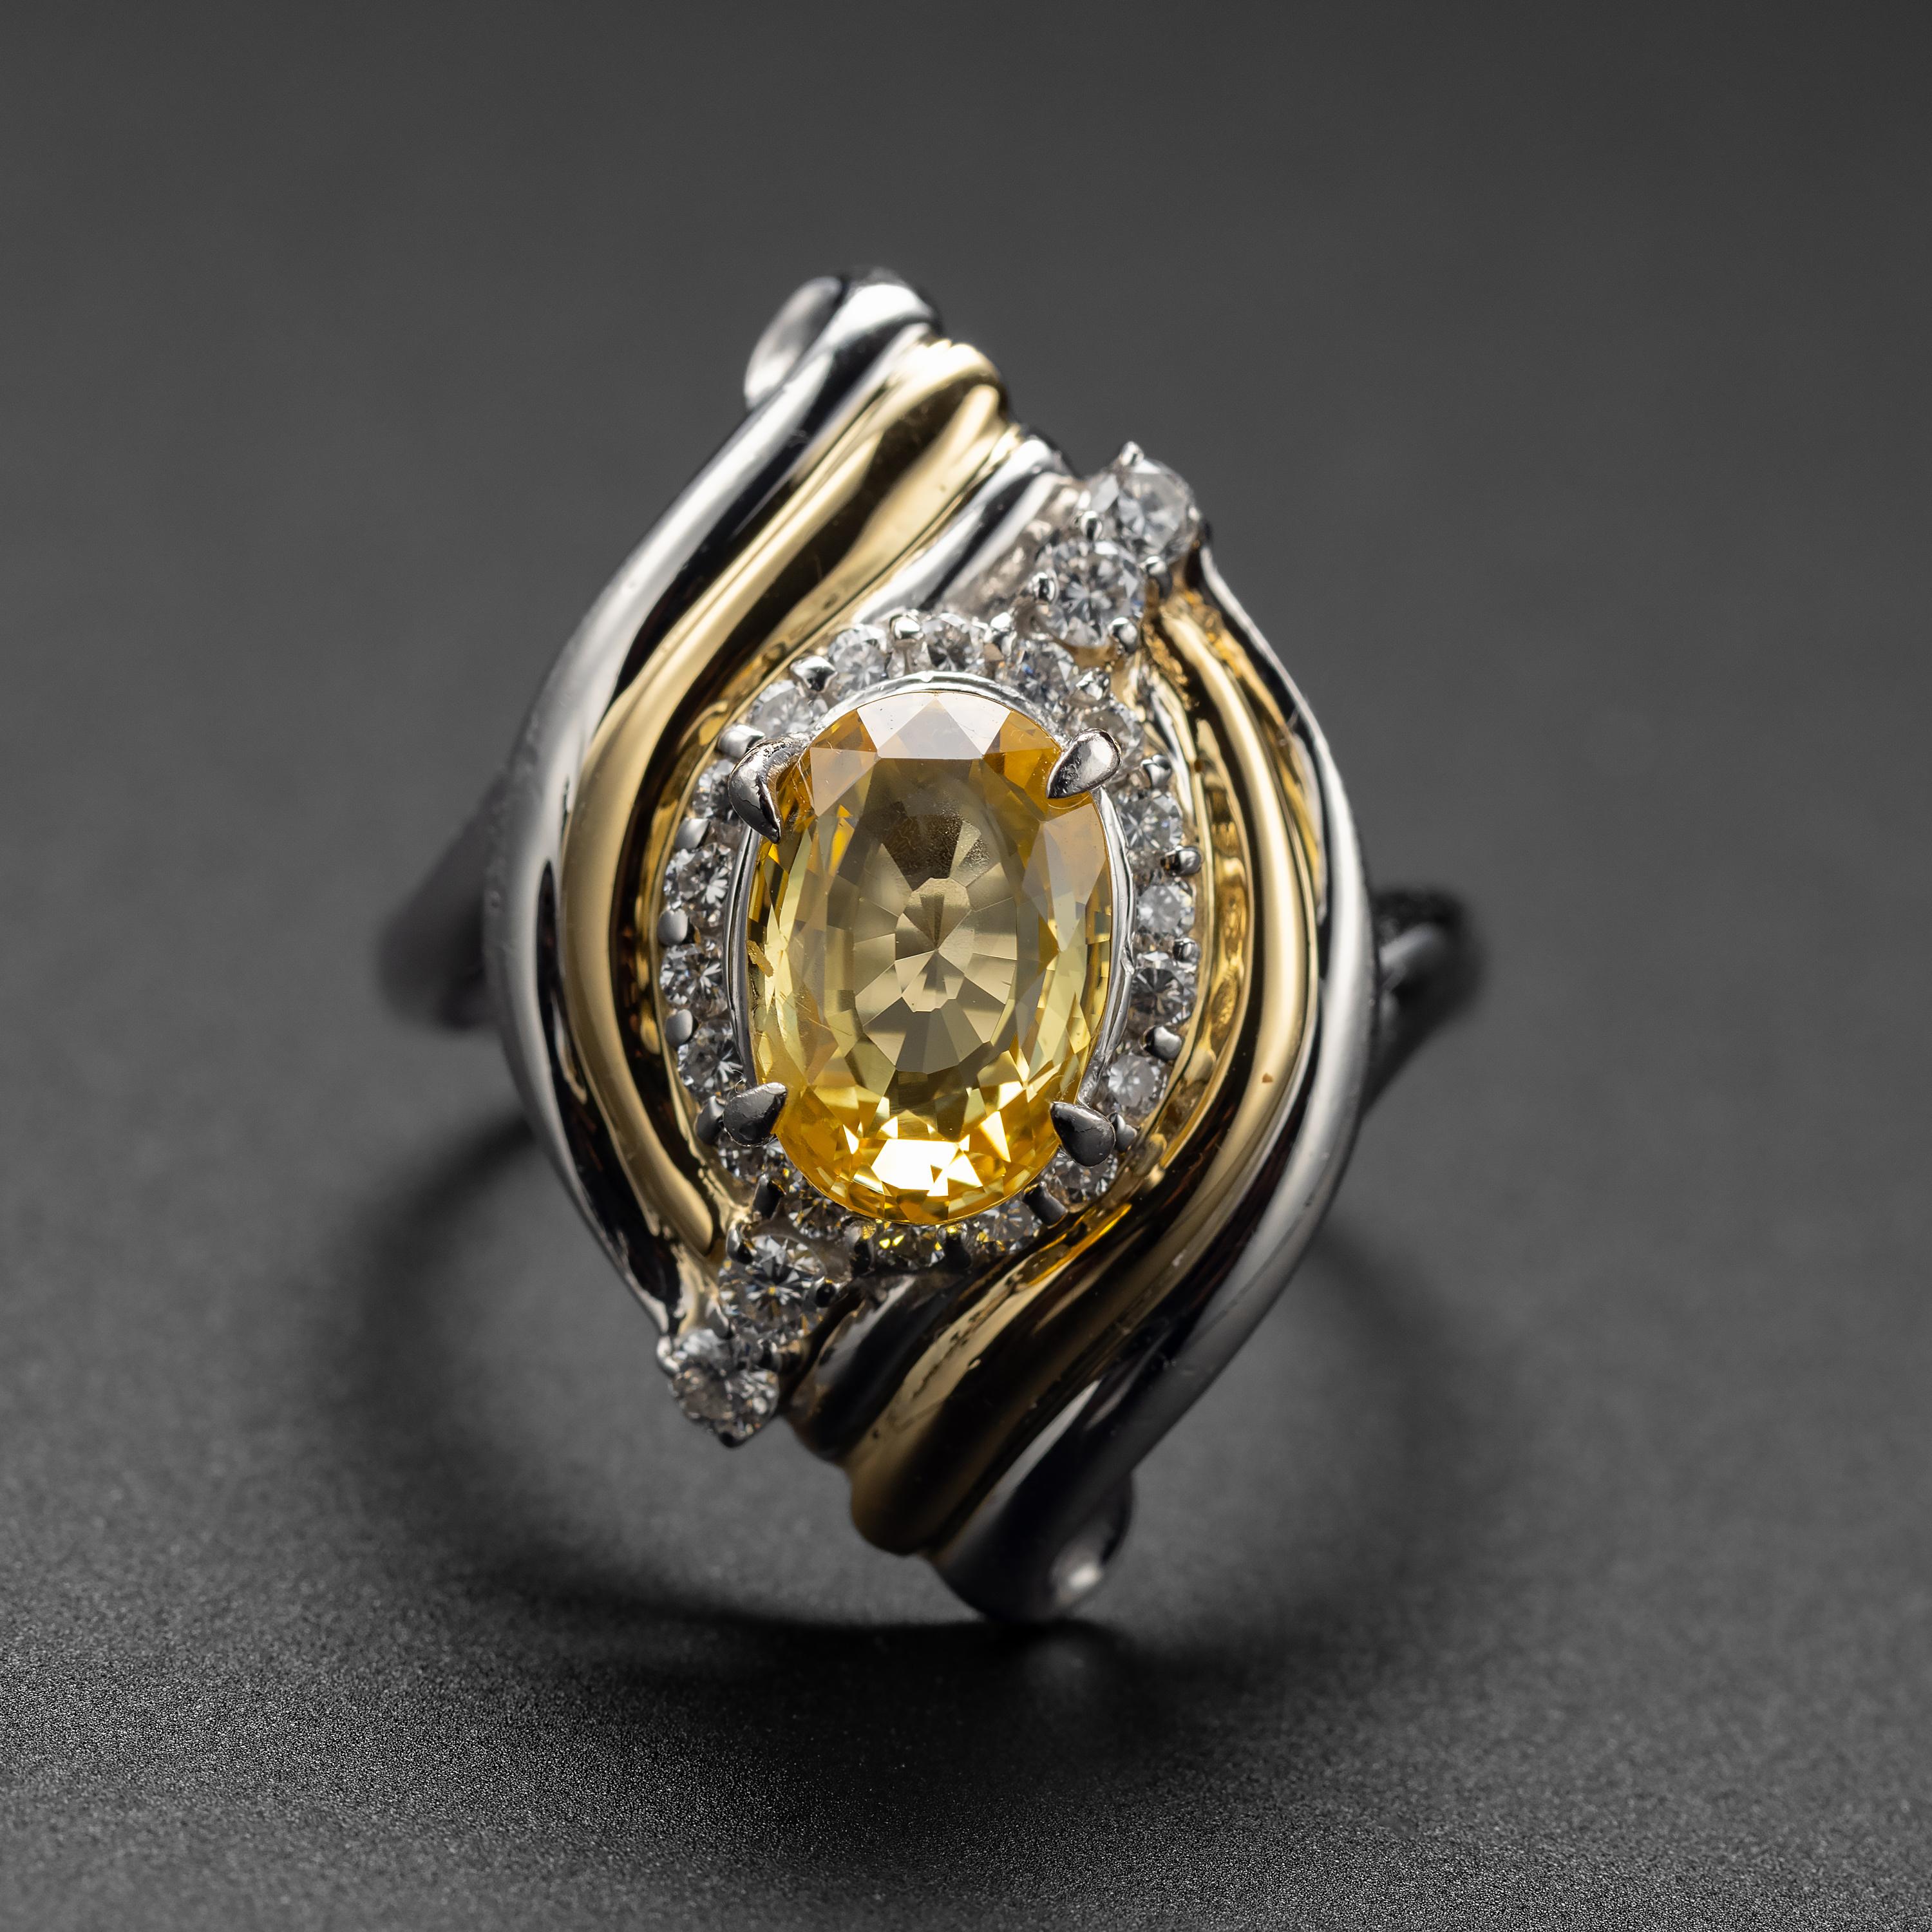 It is like your own private sun: a bright yellow, 2.87-carat natural yellow sapphire, GIA certified to be unheated. Flashing with sultry fire, this rare gemstone measures 9.74mm x 6.70mm and resides within a handmade setting created in gleaming